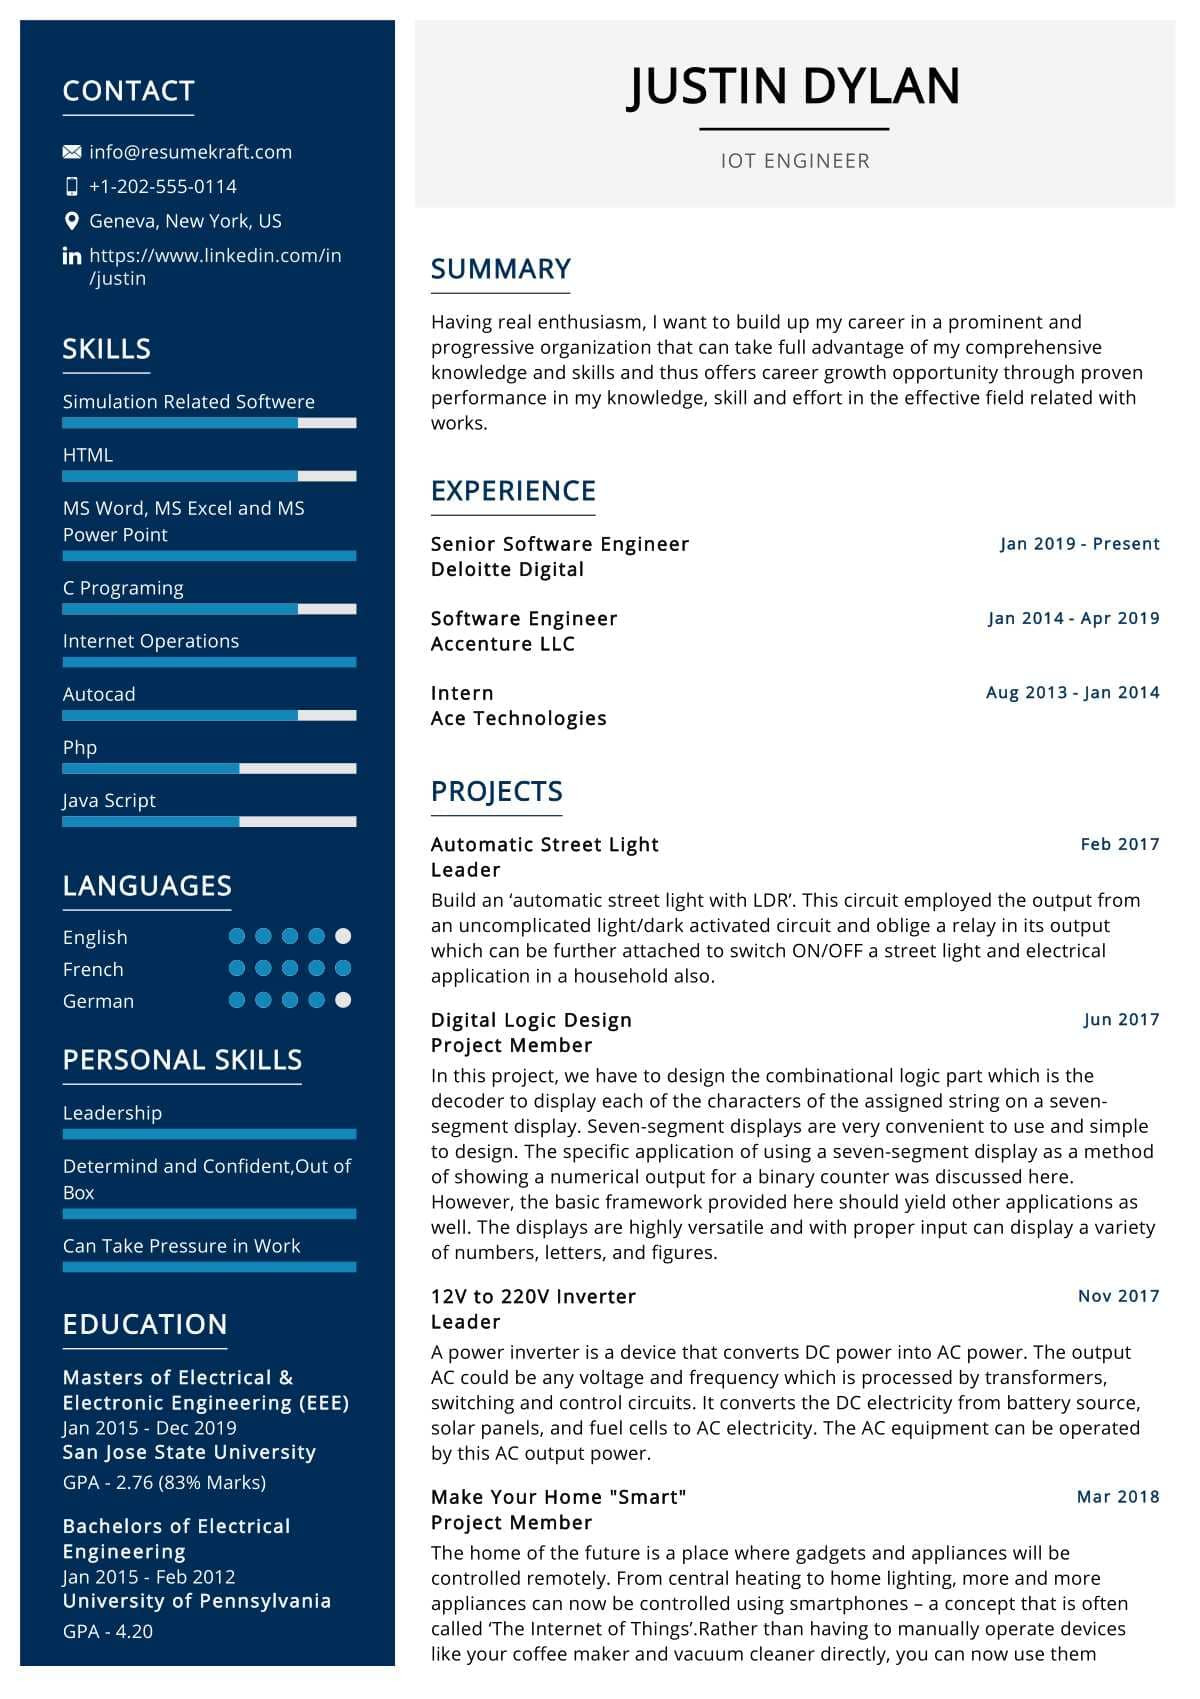 Resume Samples for Ece Engineers Freshers Iot Engineer Resume Sample 2022 Writing Tips – Resumekraft